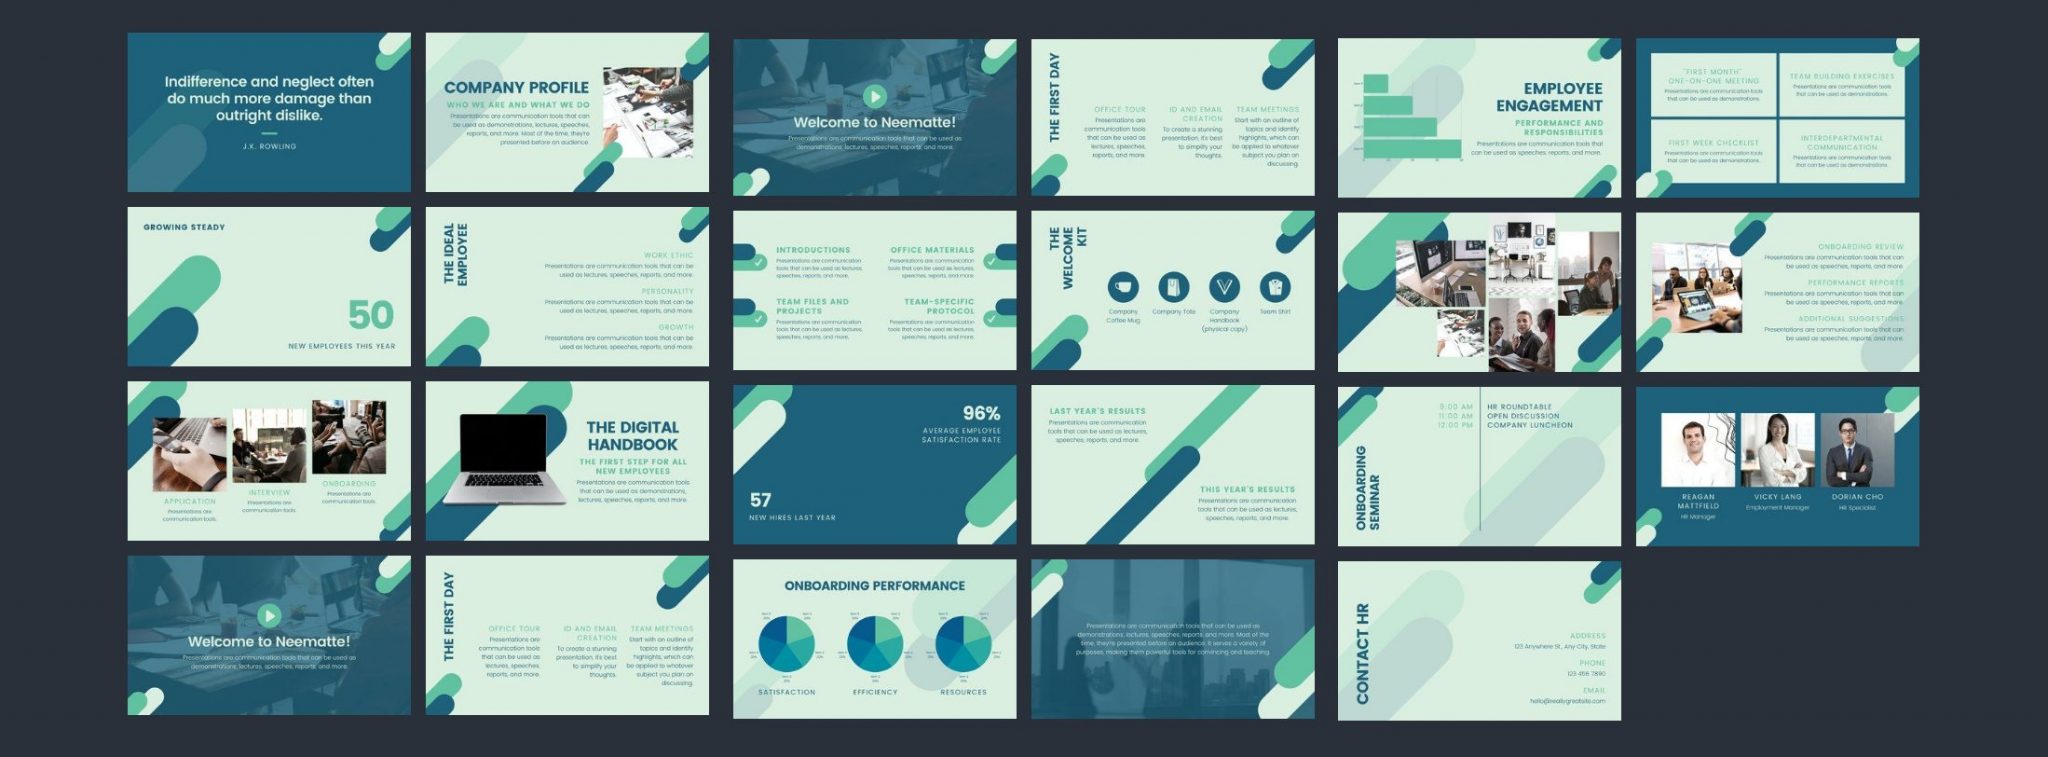 elearning powerpoint templates